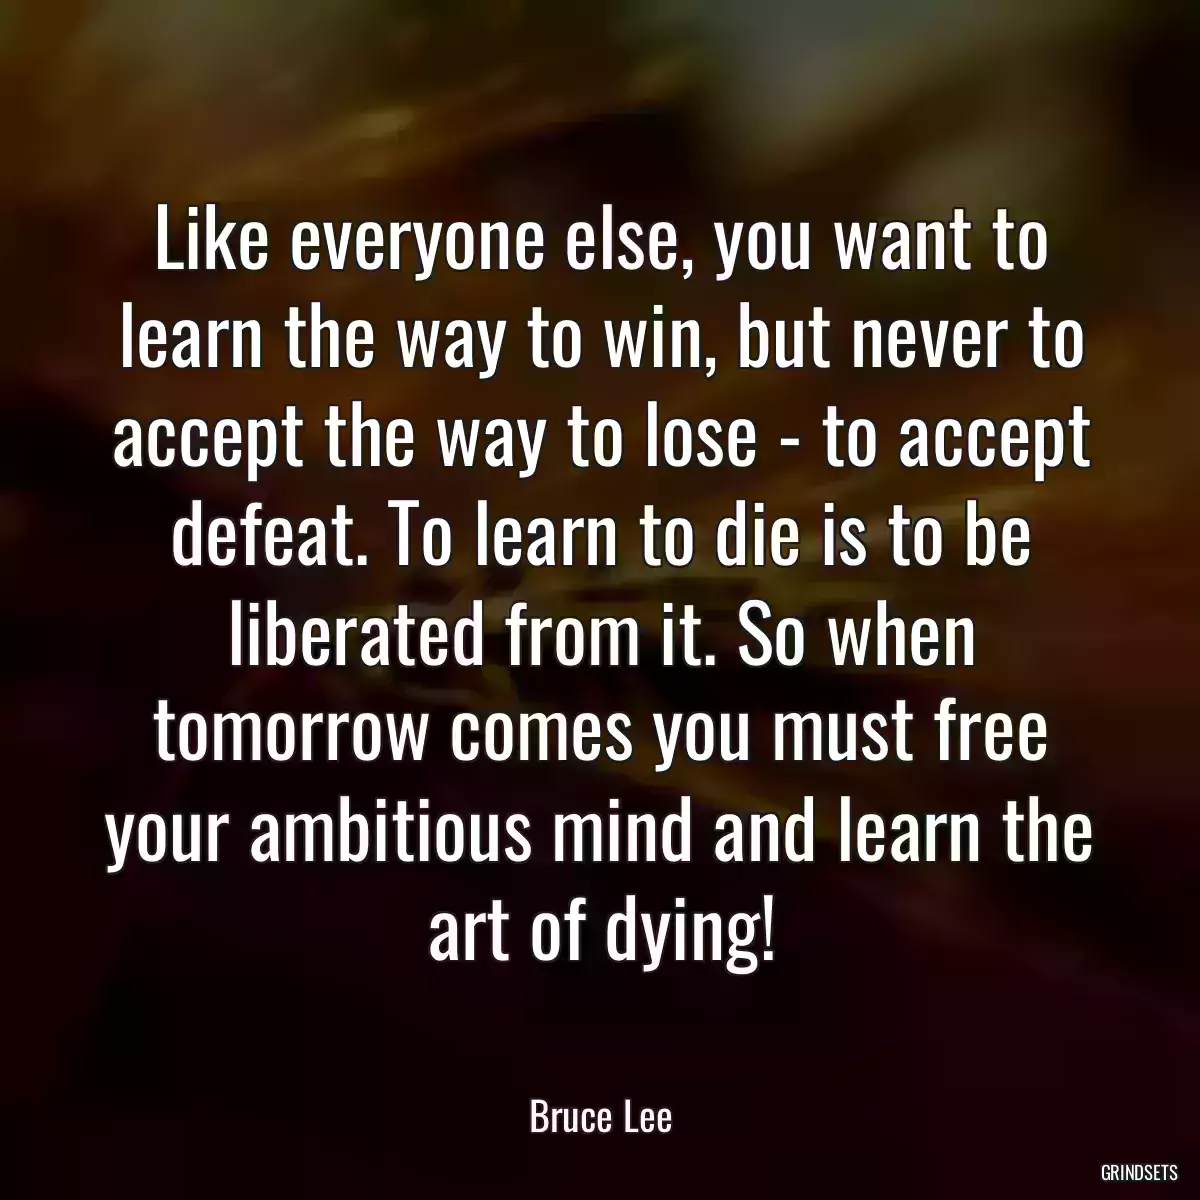 Like everyone else, you want to learn the way to win, but never to accept the way to lose - to accept defeat. To learn to die is to be liberated from it. So when tomorrow comes you must free your ambitious mind and learn the art of dying!